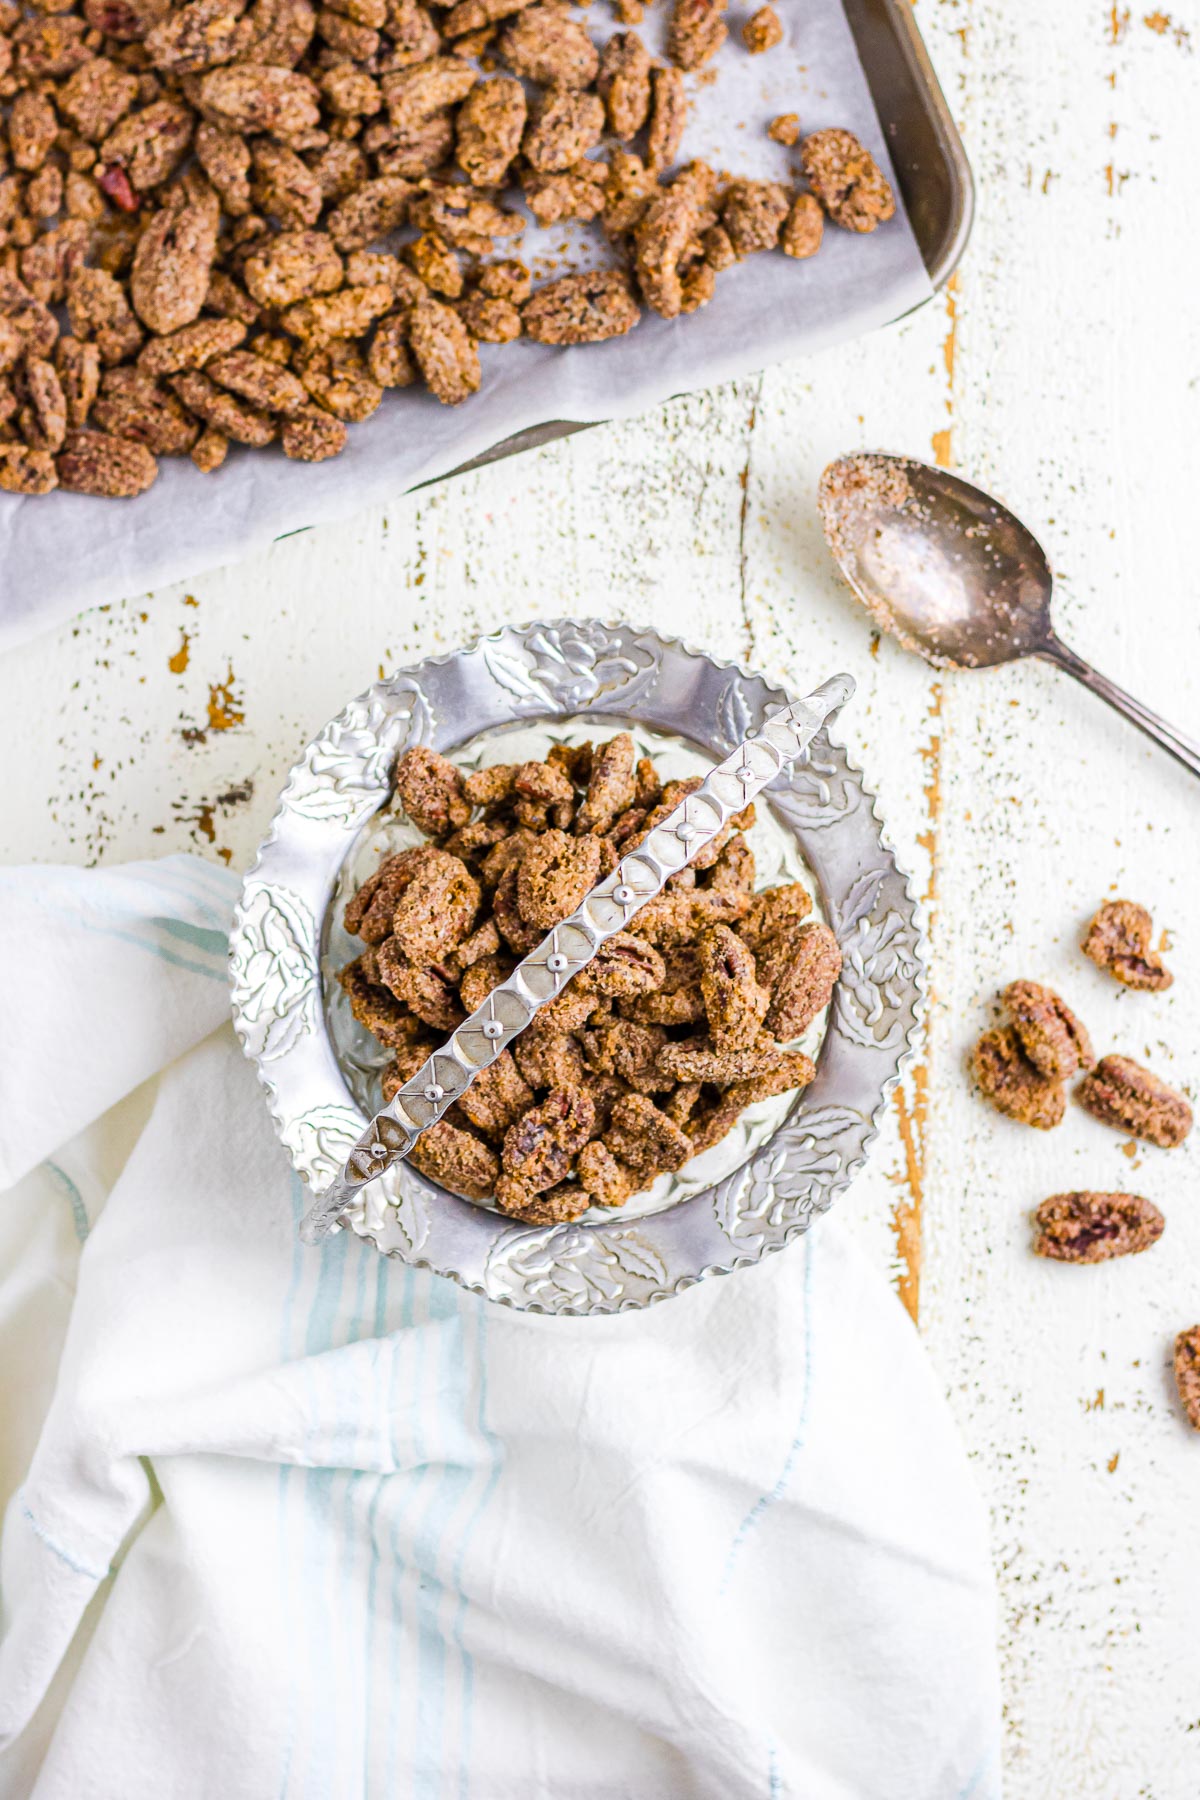 An overhead image of spiced candied pecans in a decorative bowl next to a spoon and baking sheet.